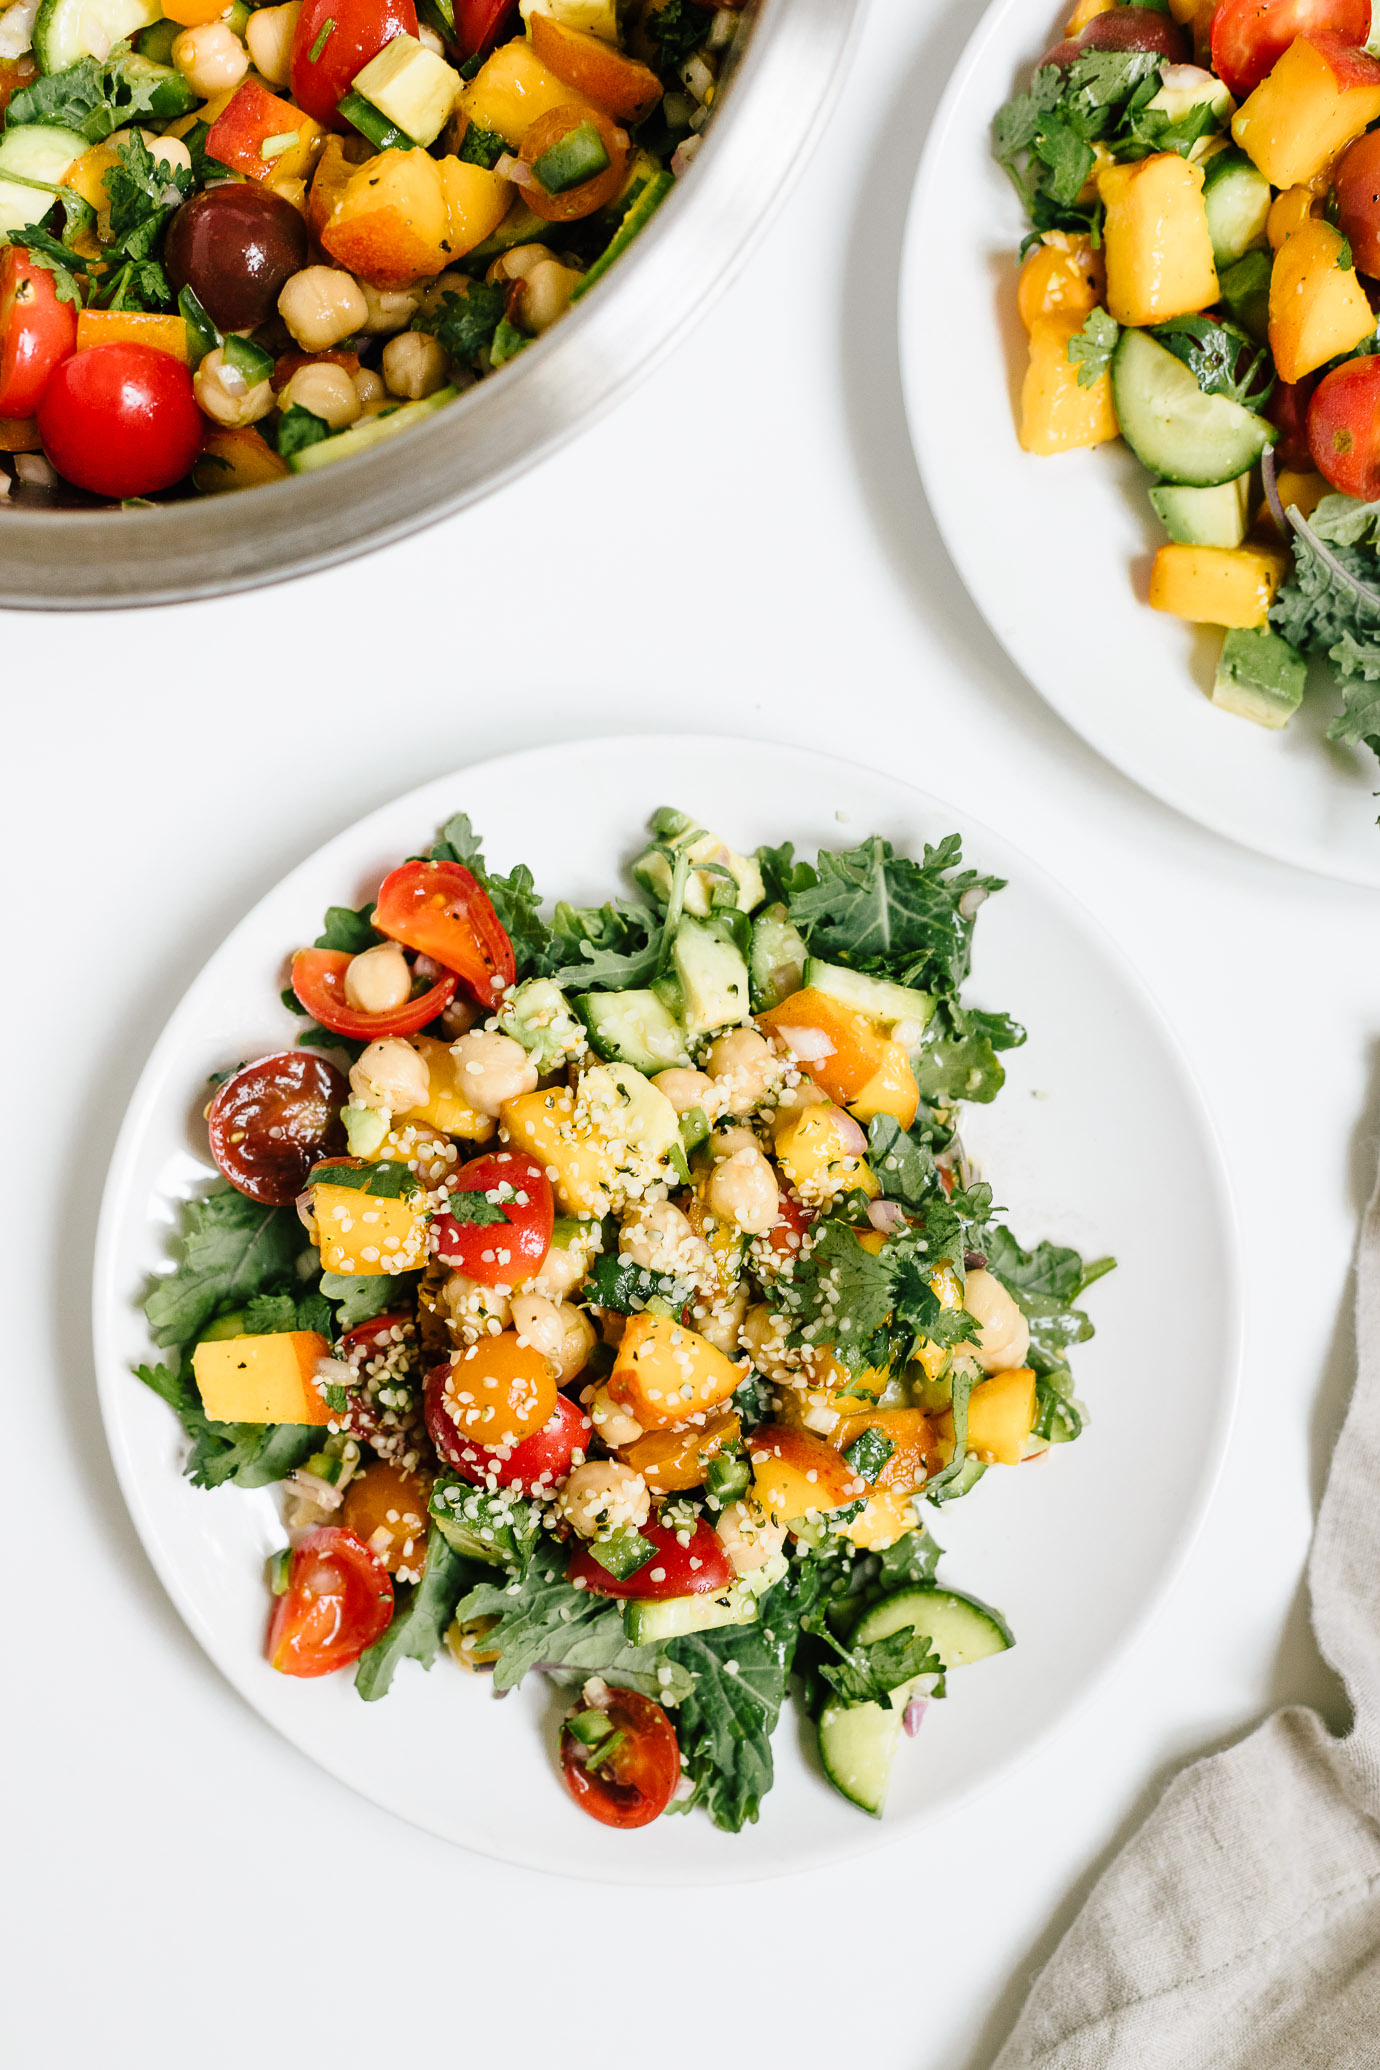 spicy tomato peach salad with chickpeas and hemp seeds